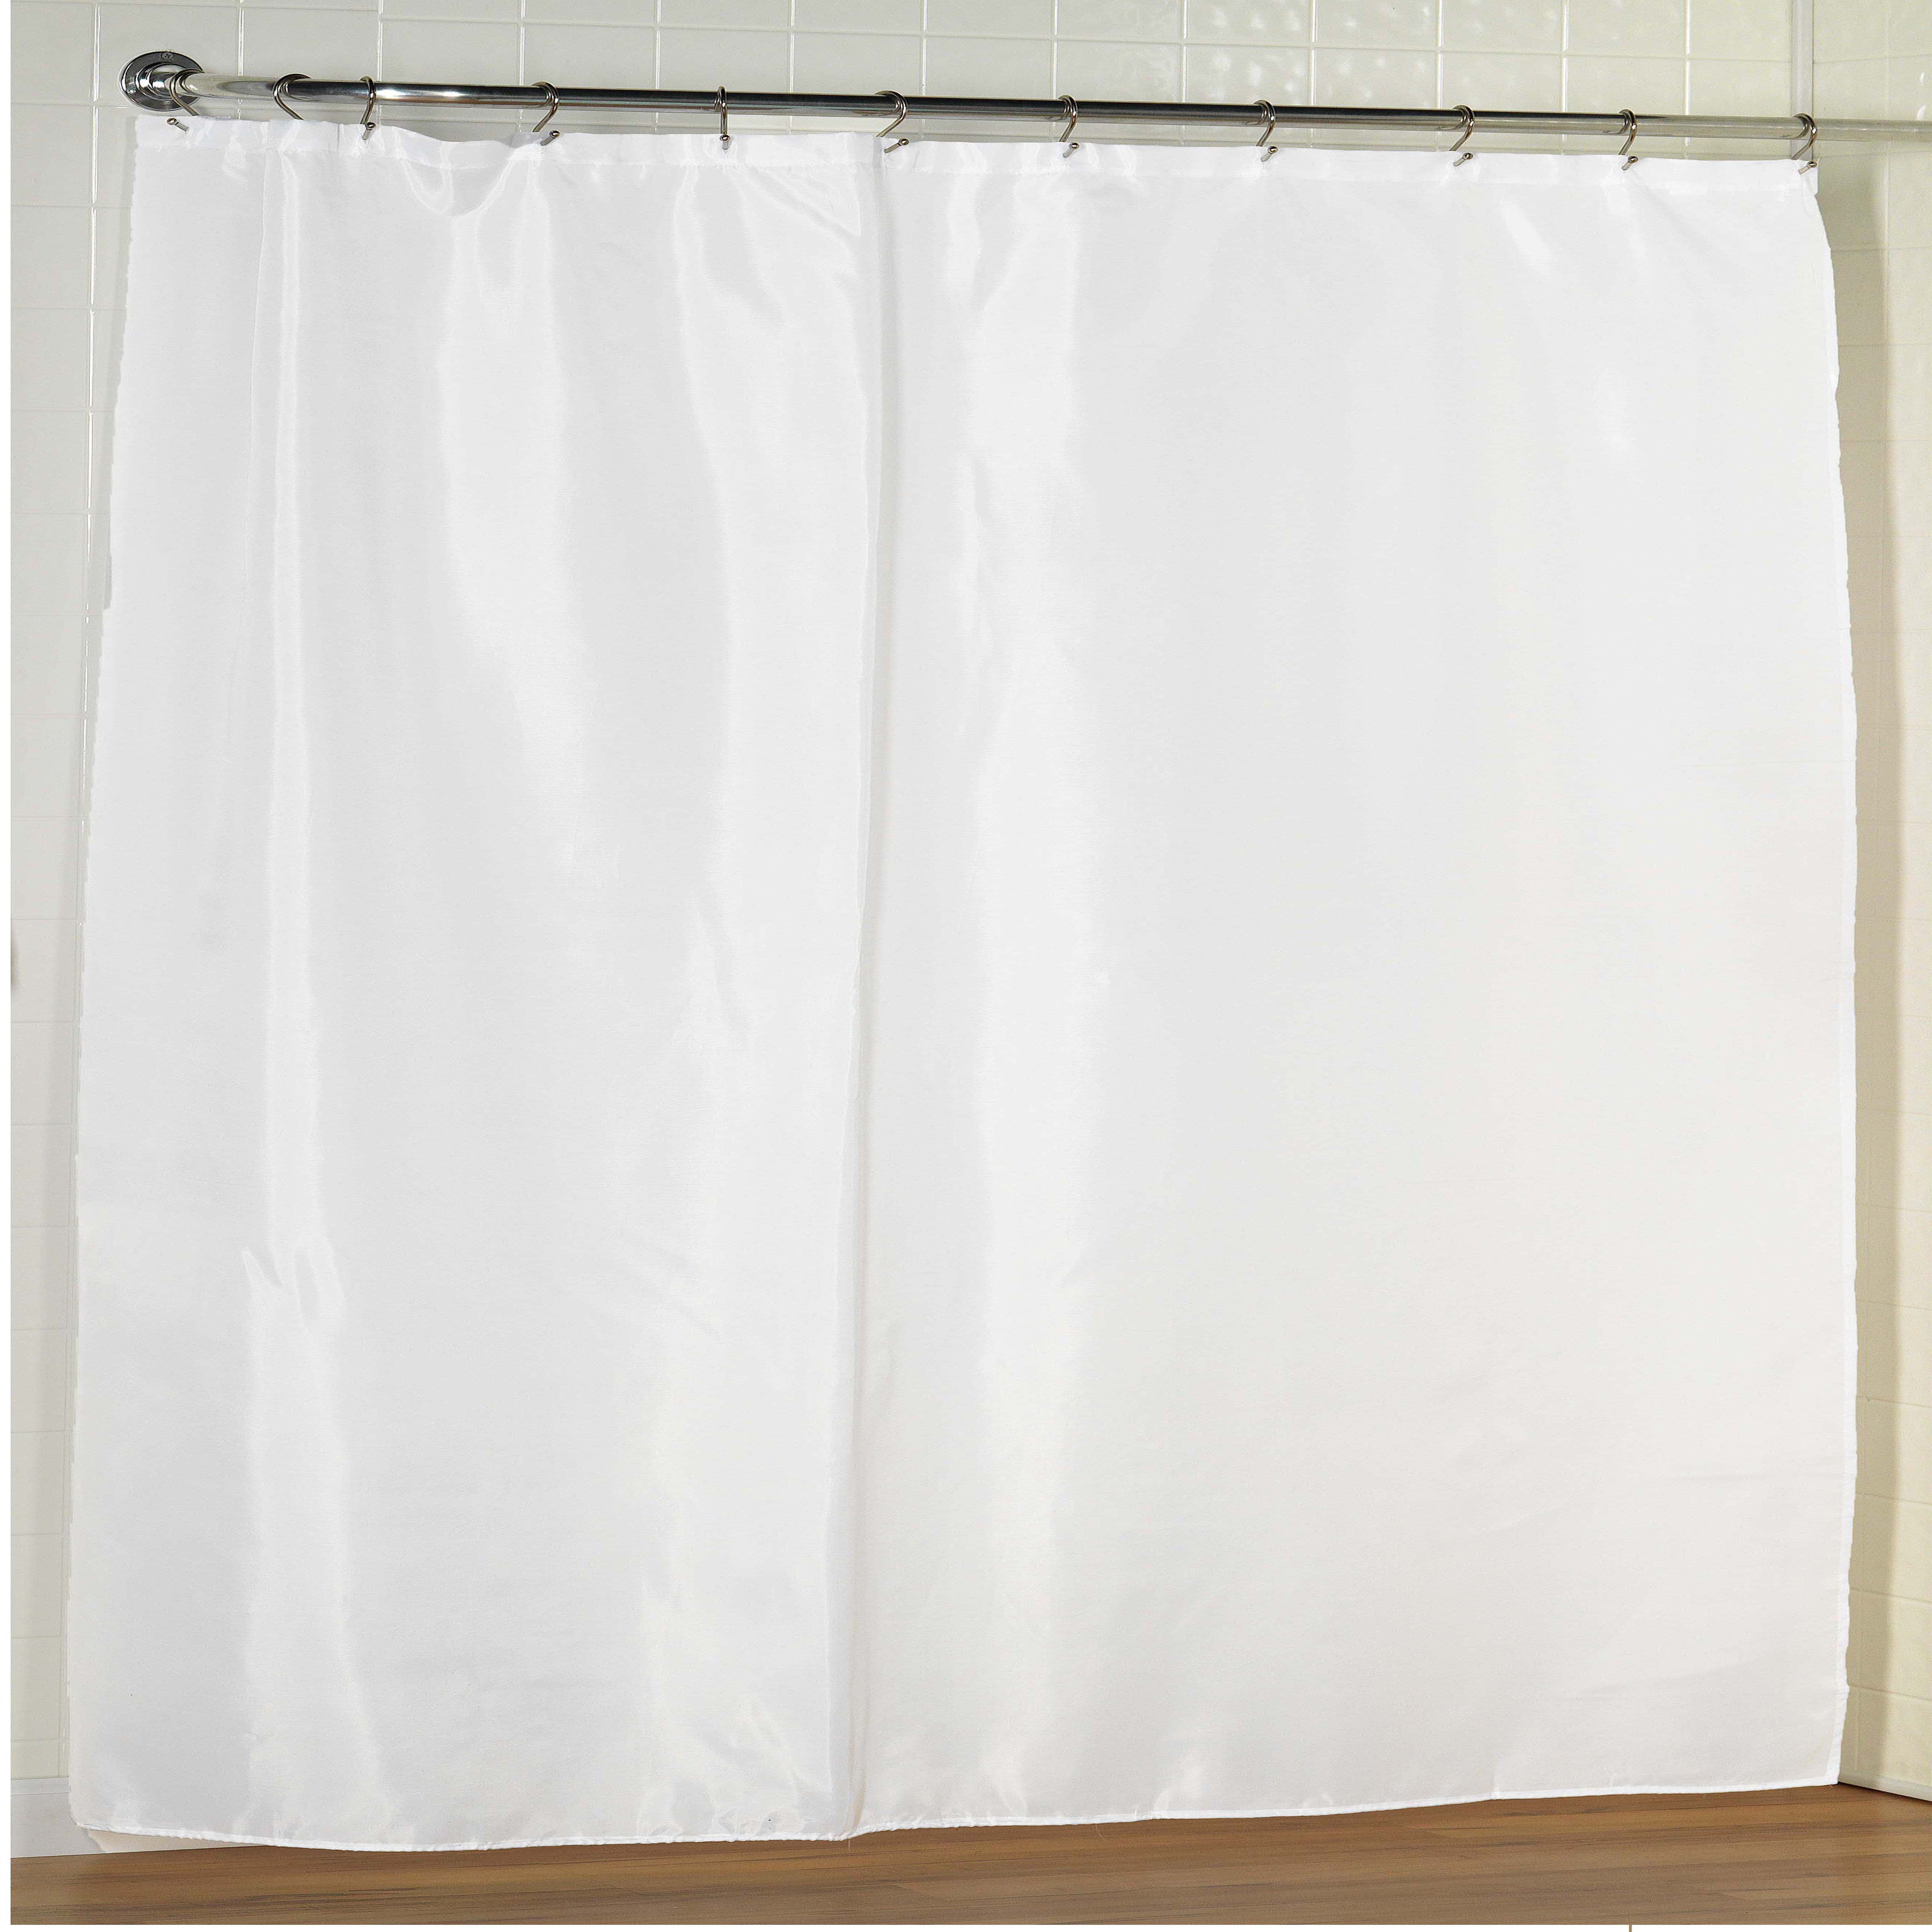 White Extra Wide Fabric Shower Curtain, 108 Wide Shower Curtain Liner